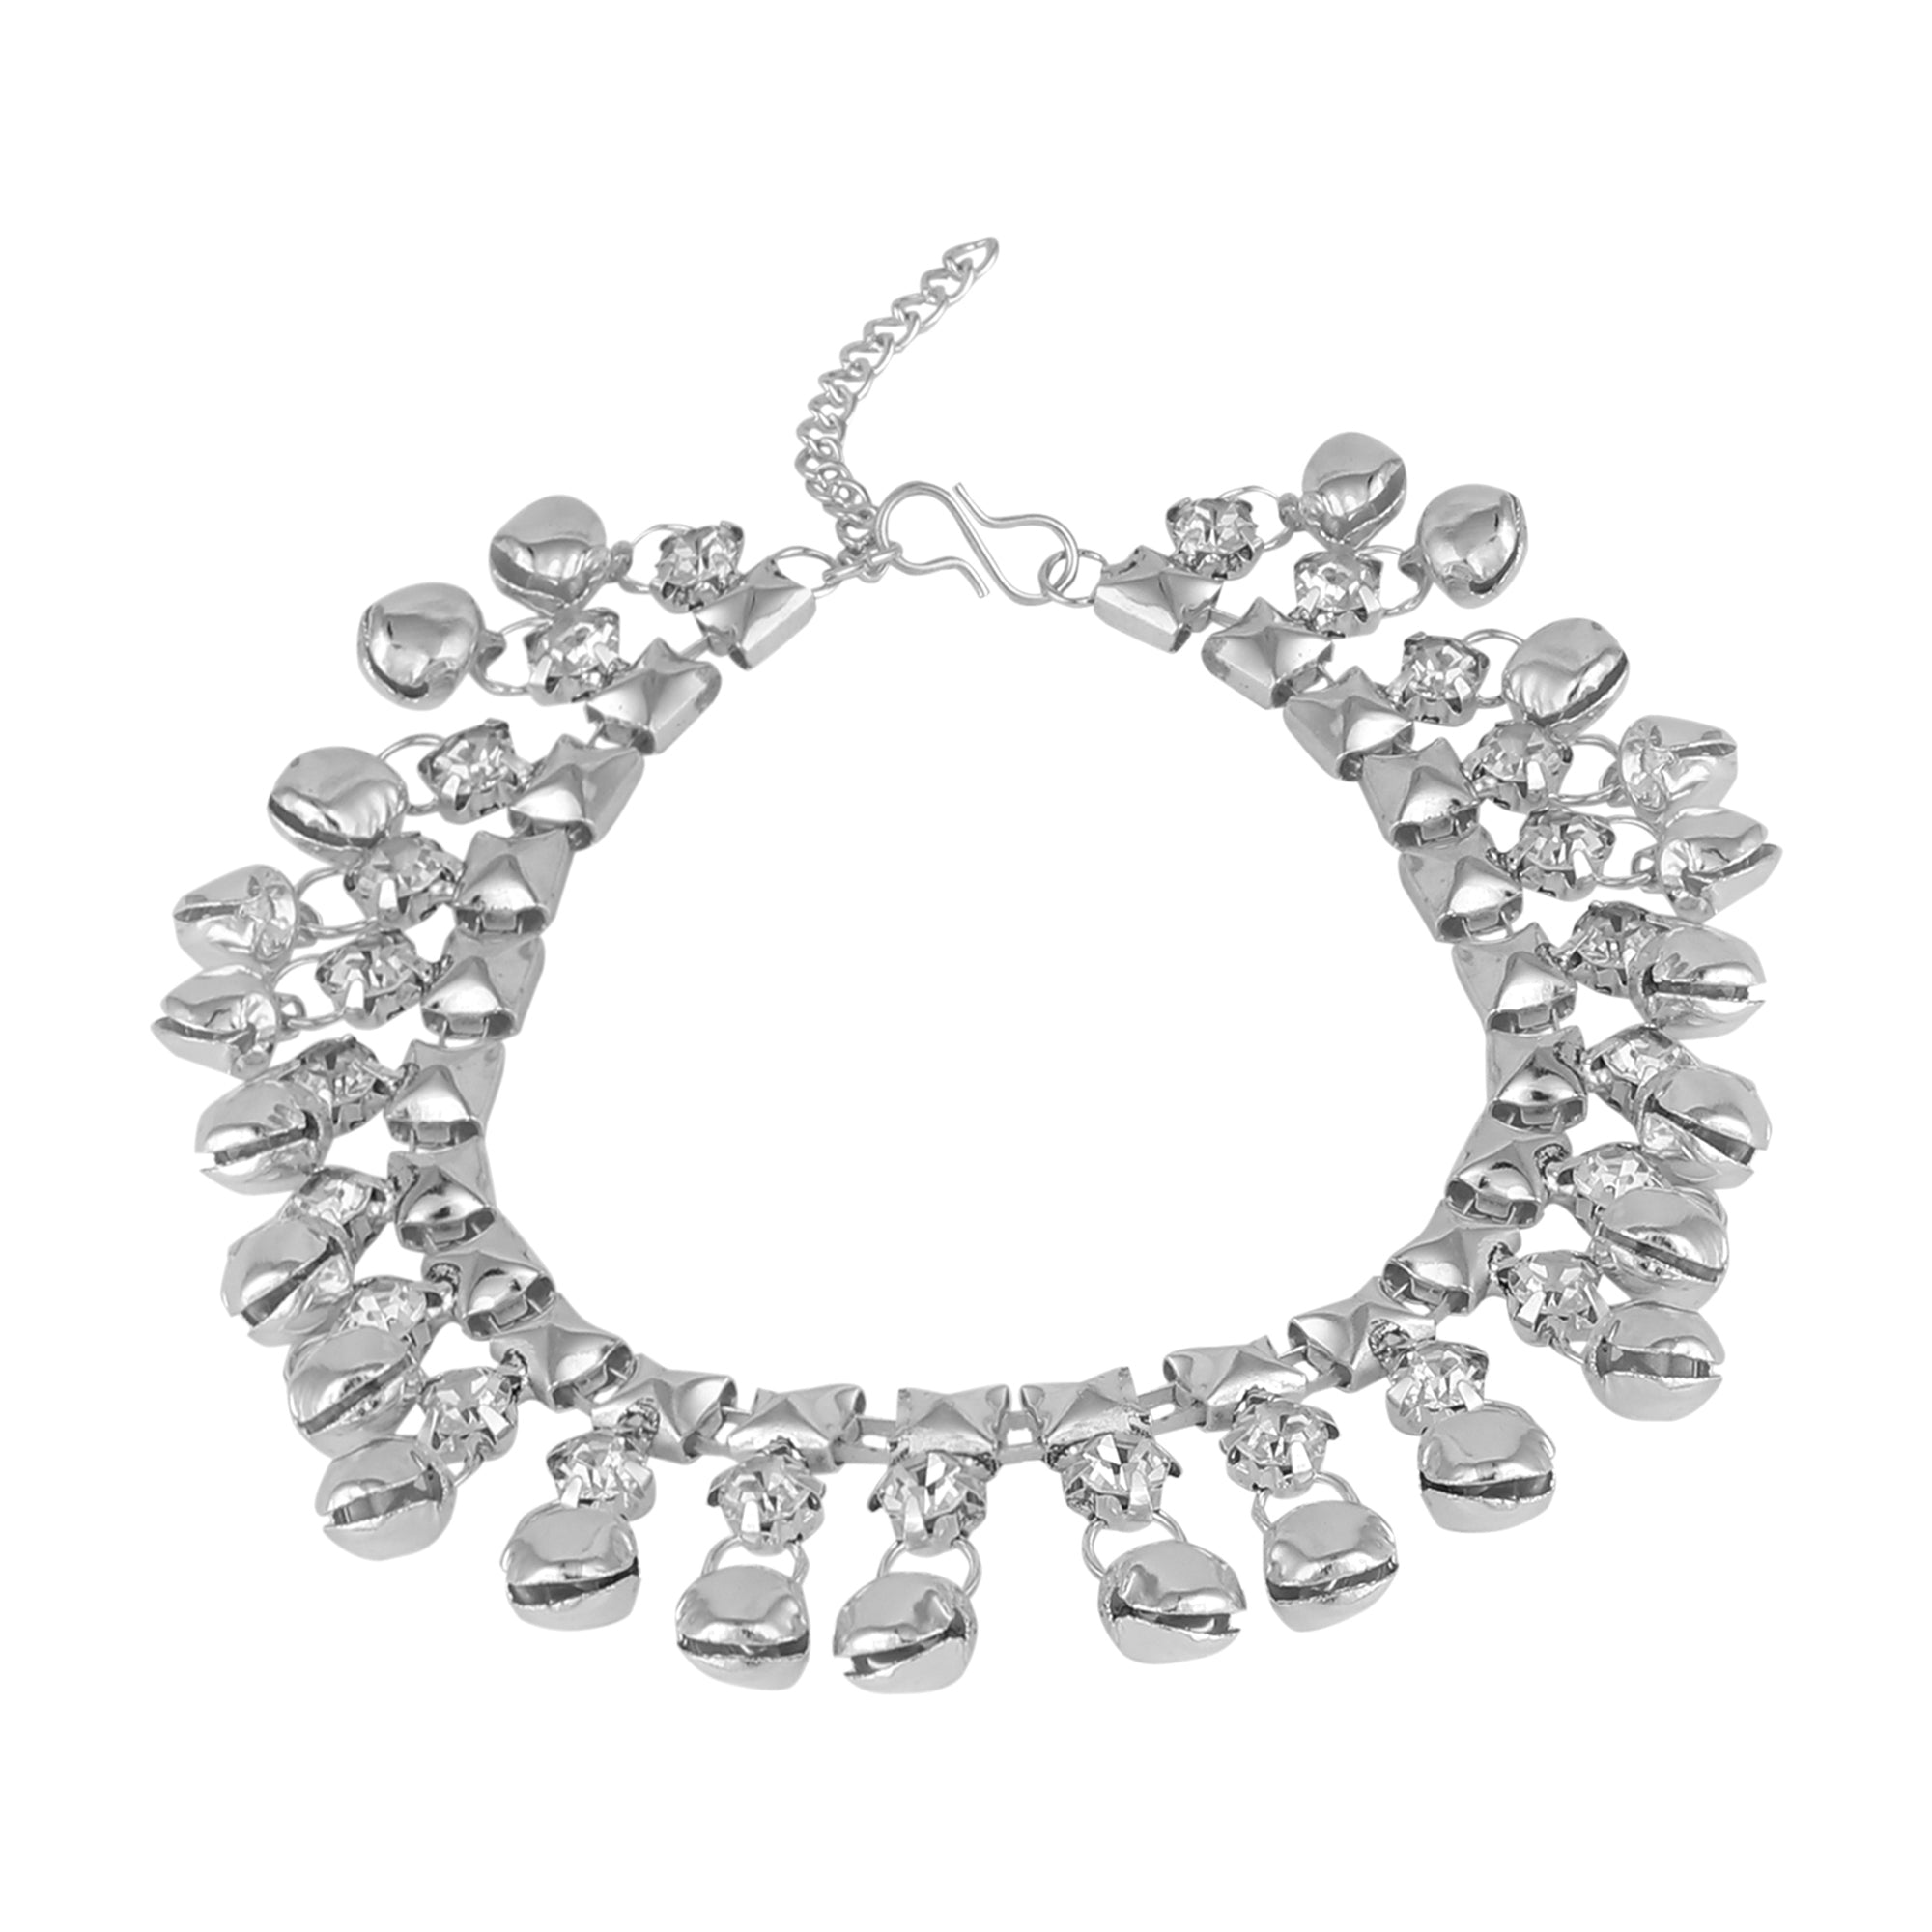 Women's Metallic Silver Ghungru Studded Statement Anklets - MODE MANIA